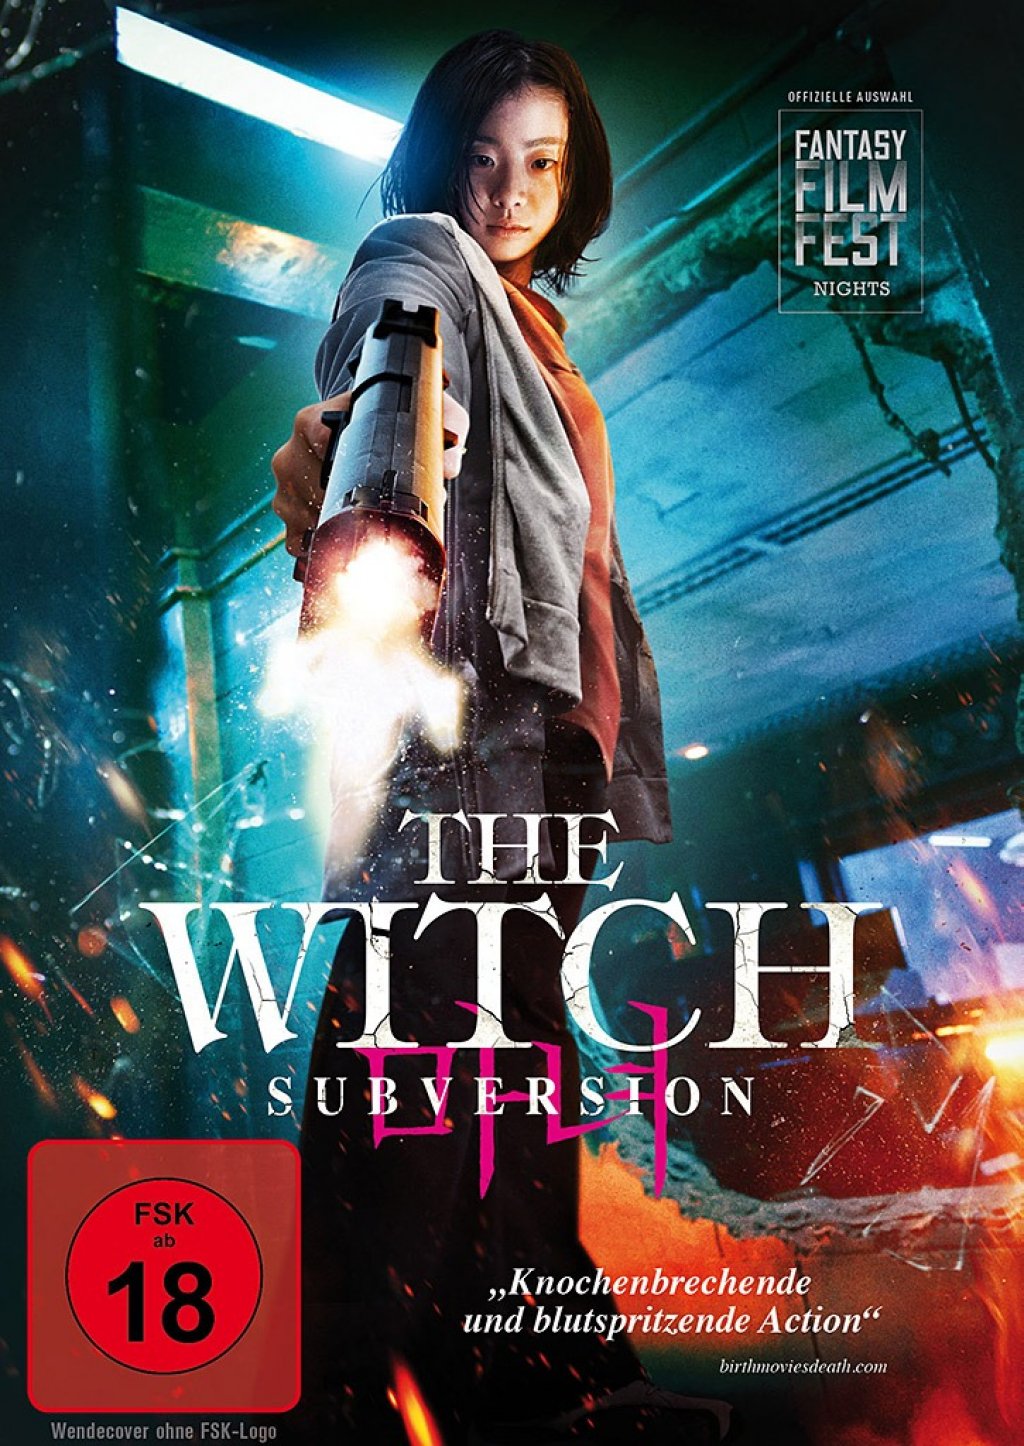 the witch part 1 subversion discussion